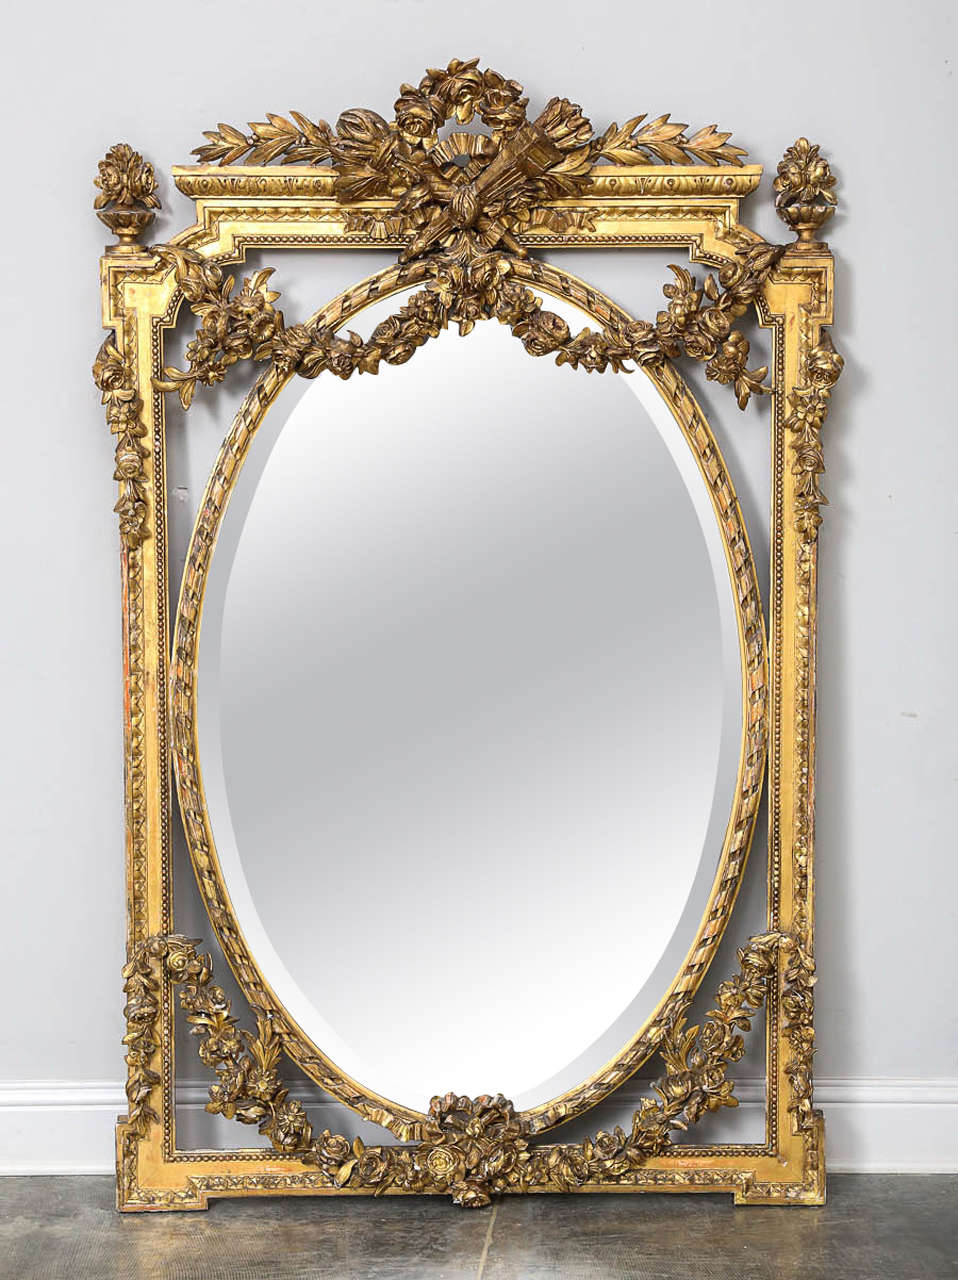 Outstanding mirror with oval mirror suspended in ornate rectangular frame. Beautiful carved and gilded swags of flowers.

Established in 1979, Joyce Horn Antiques, ltd. continues its 36 year tradition of being a family owned and operated business